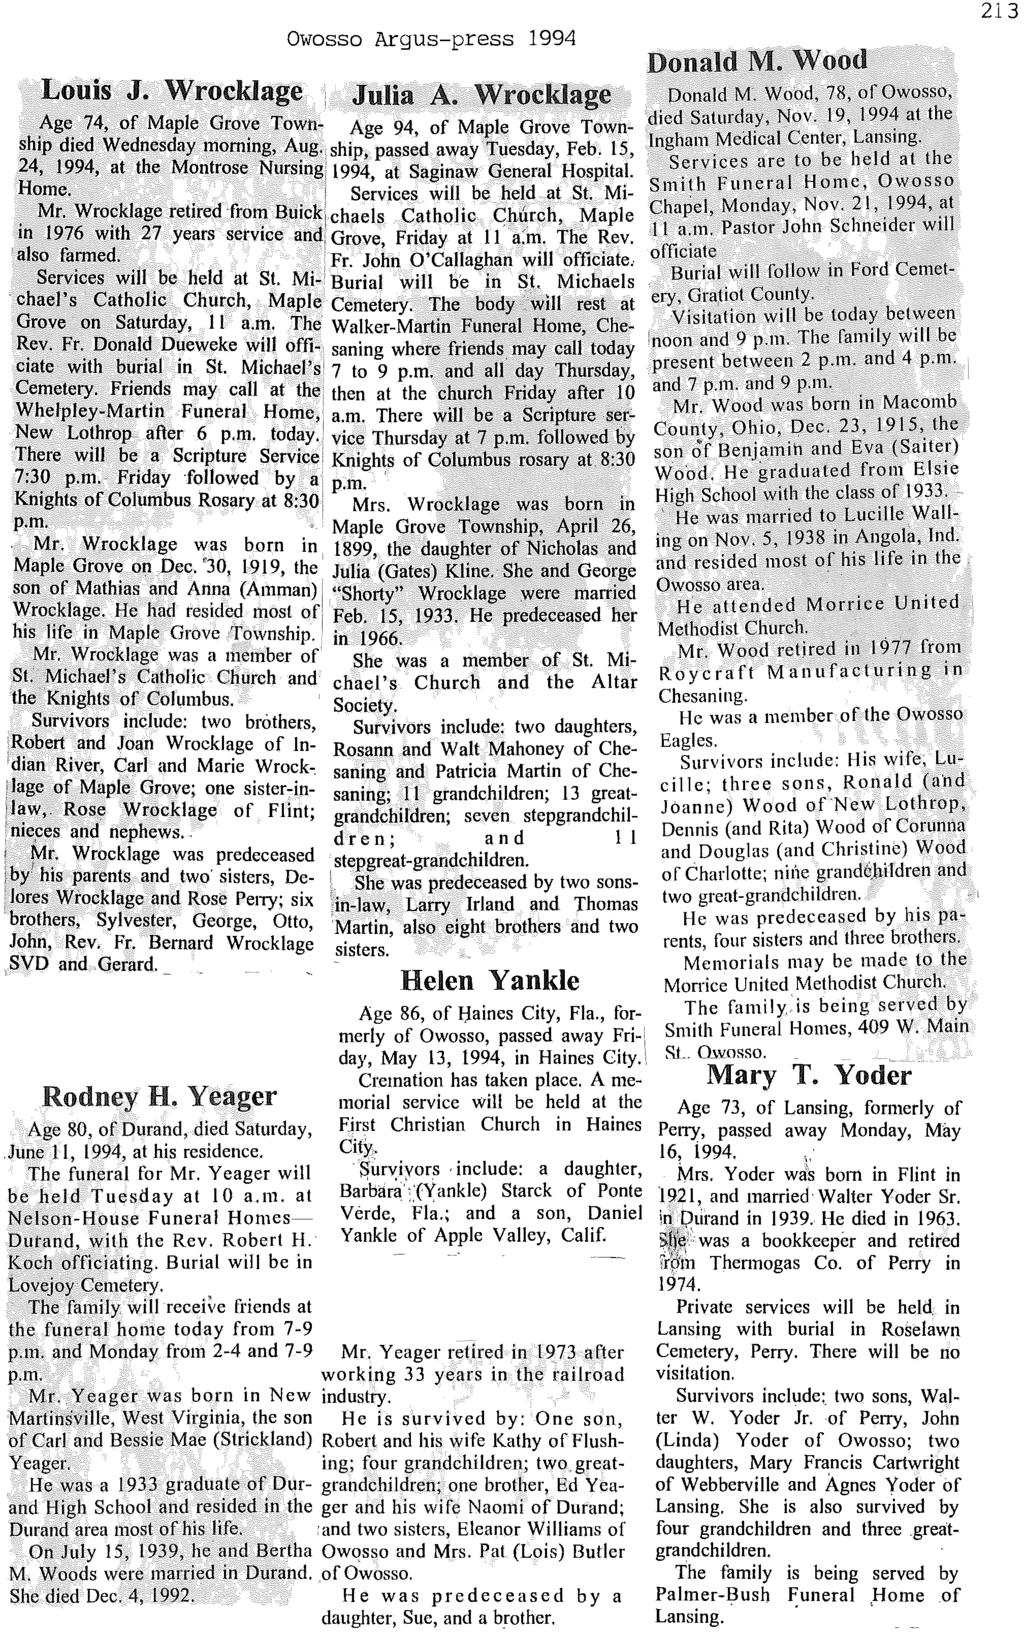 Owosso Argus-press 1994 LOUIS J. Wrocklage, Julia A. Wrocklage f\ge. 74, of MapJe Gro~e Town- Age 94, of Maple Grove TownshIp died Wednesday mornmg, A?g.ship, passed away Tuesday, Feb.